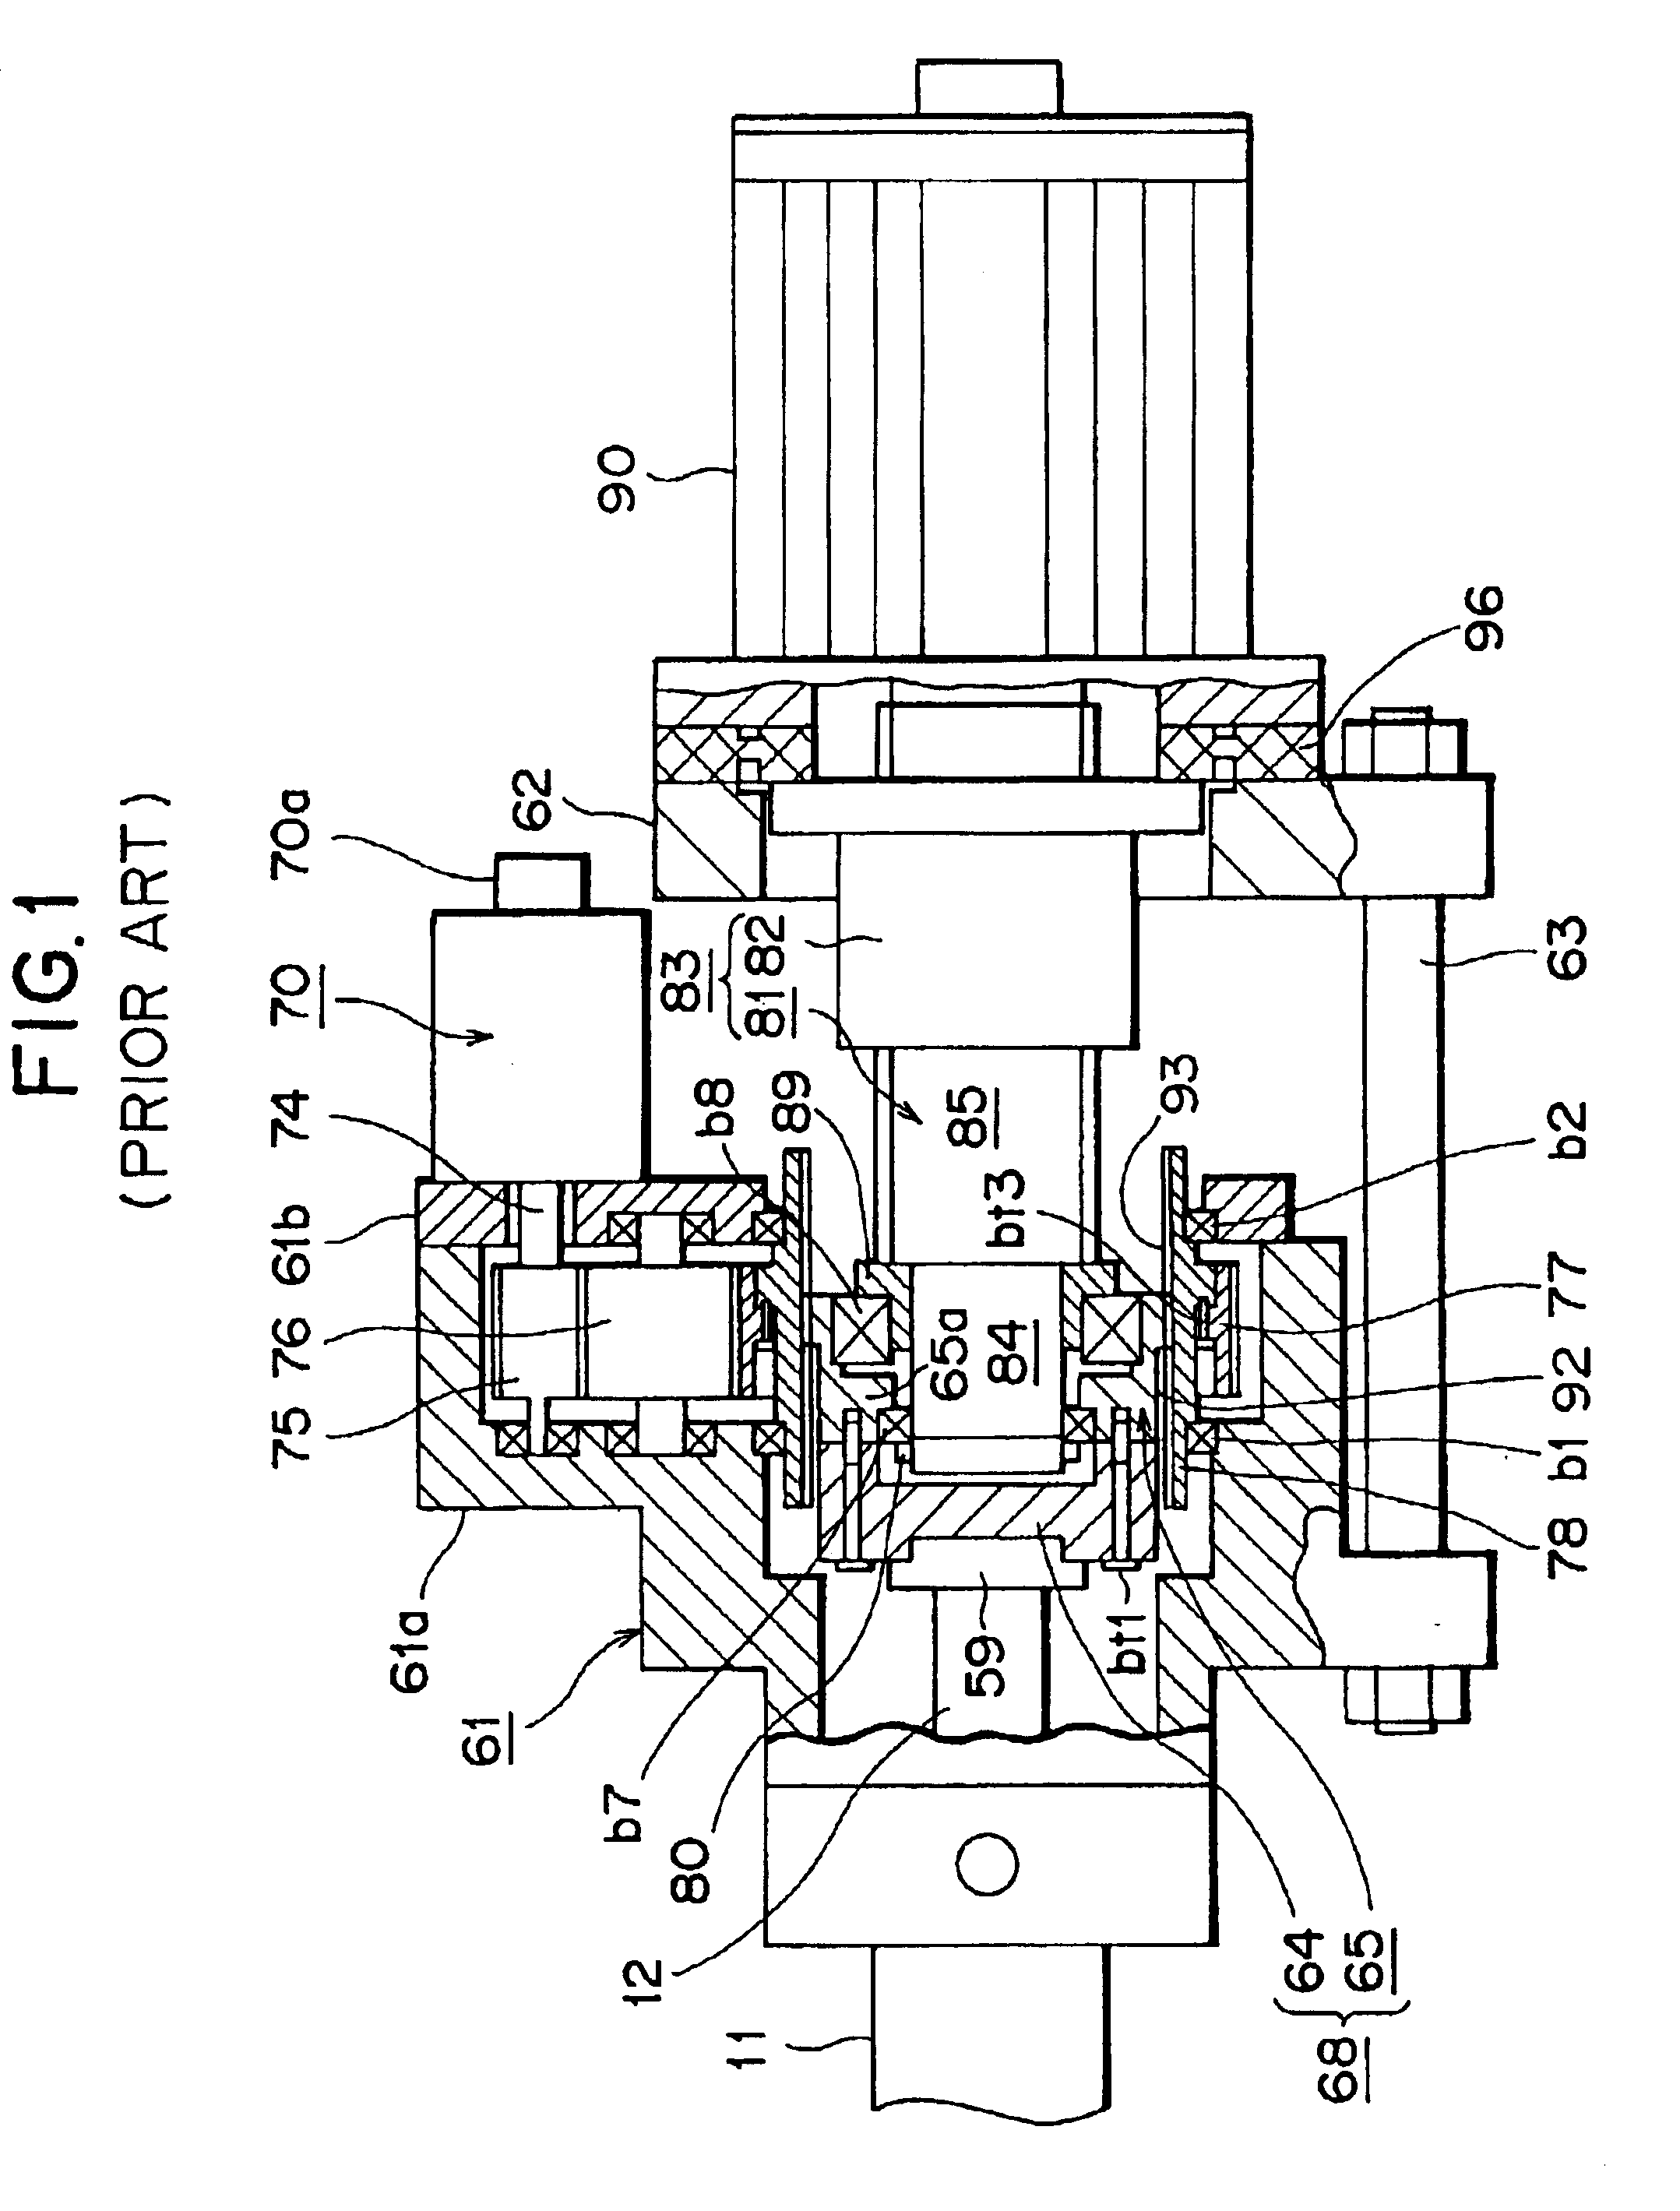 Injection apparatus